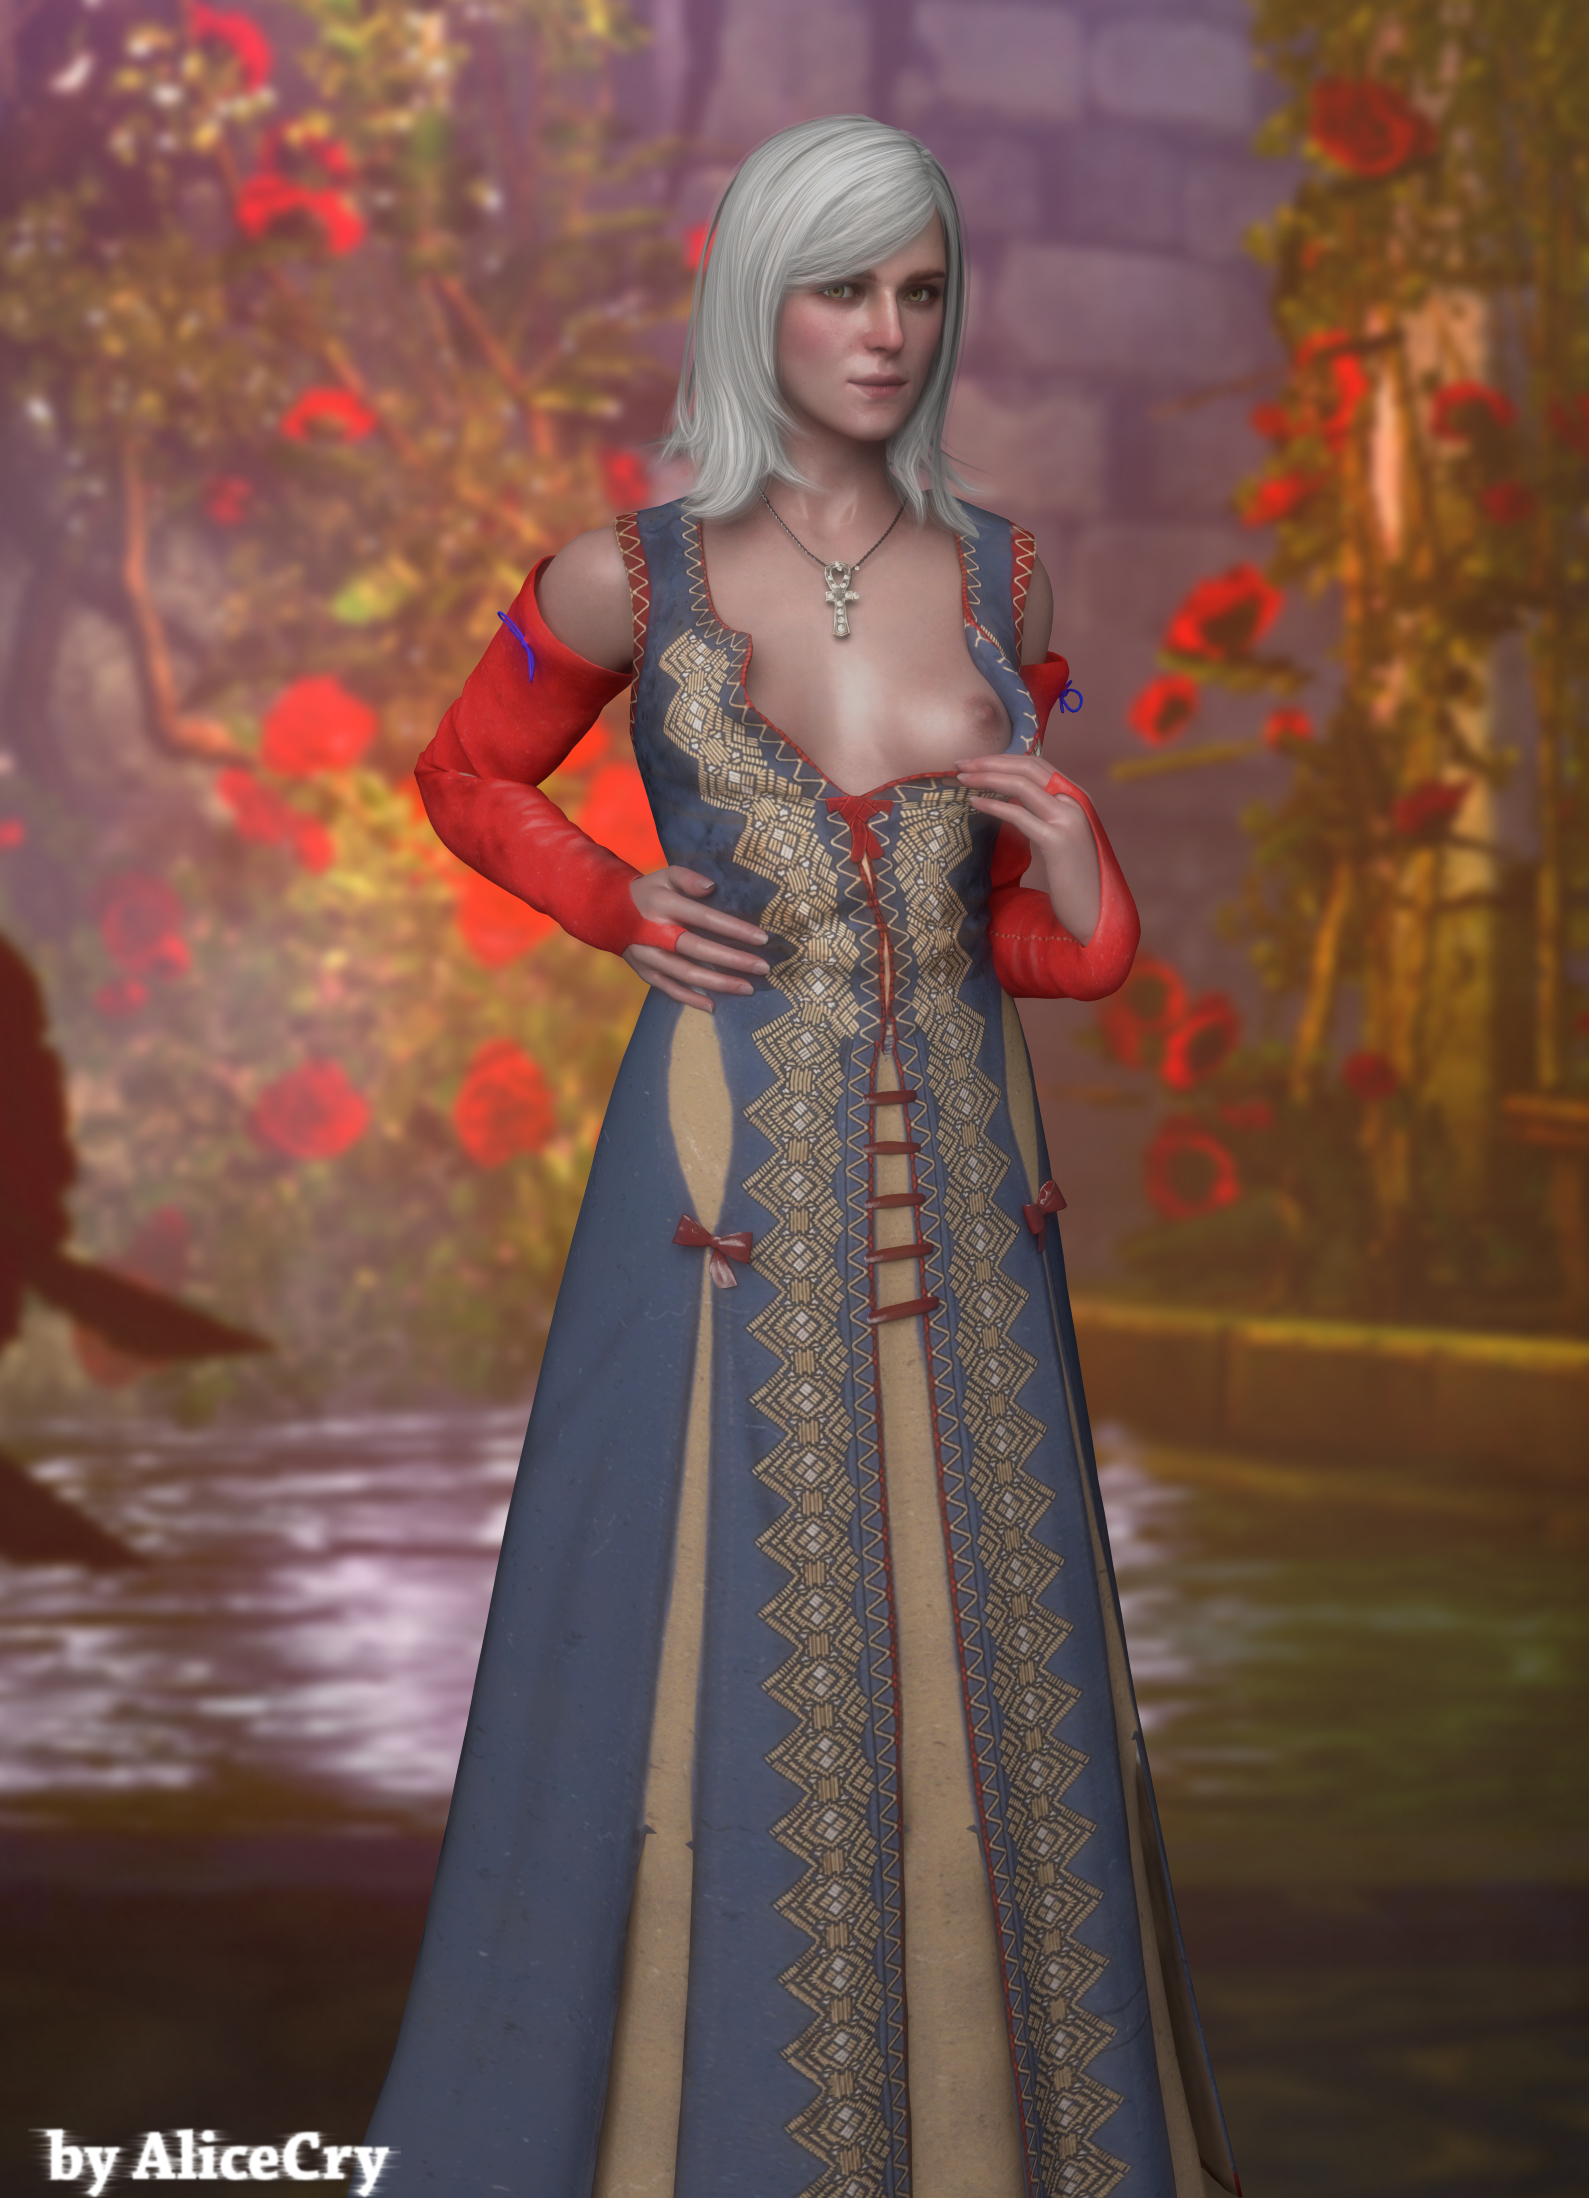 Post 1669474 Alicecry Keira Metz The Witcher The Witcher 3